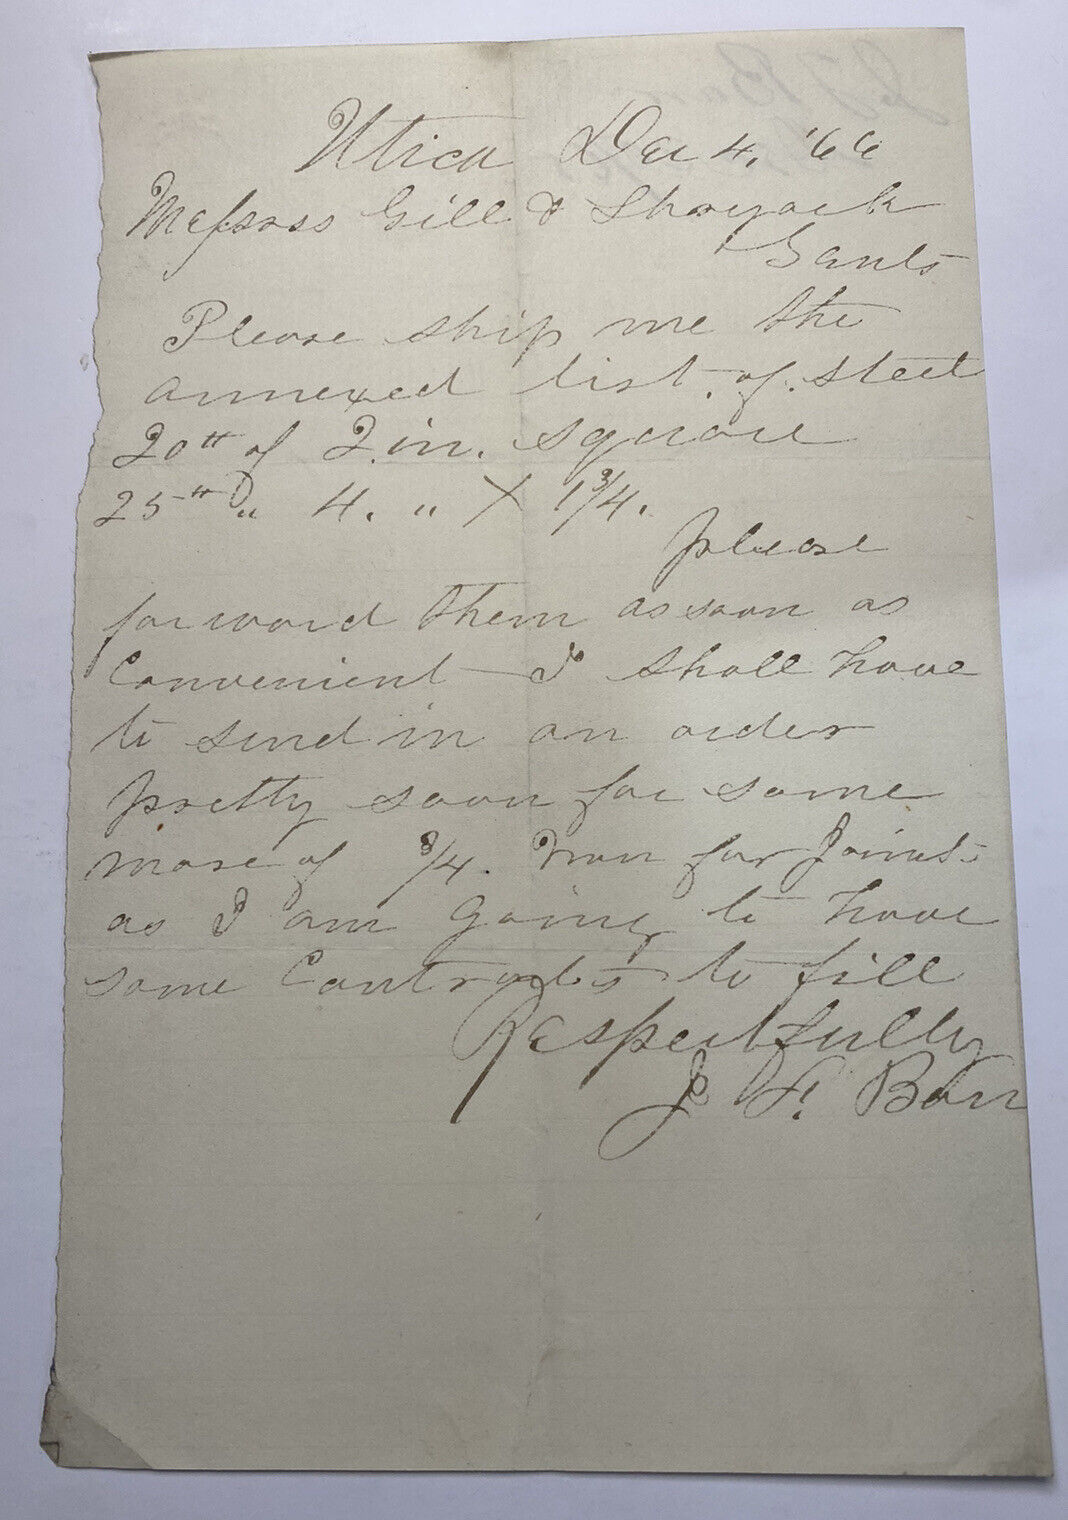 Two 19th Century Letters (1865-66) from Utica New York regarding Steel Purchases